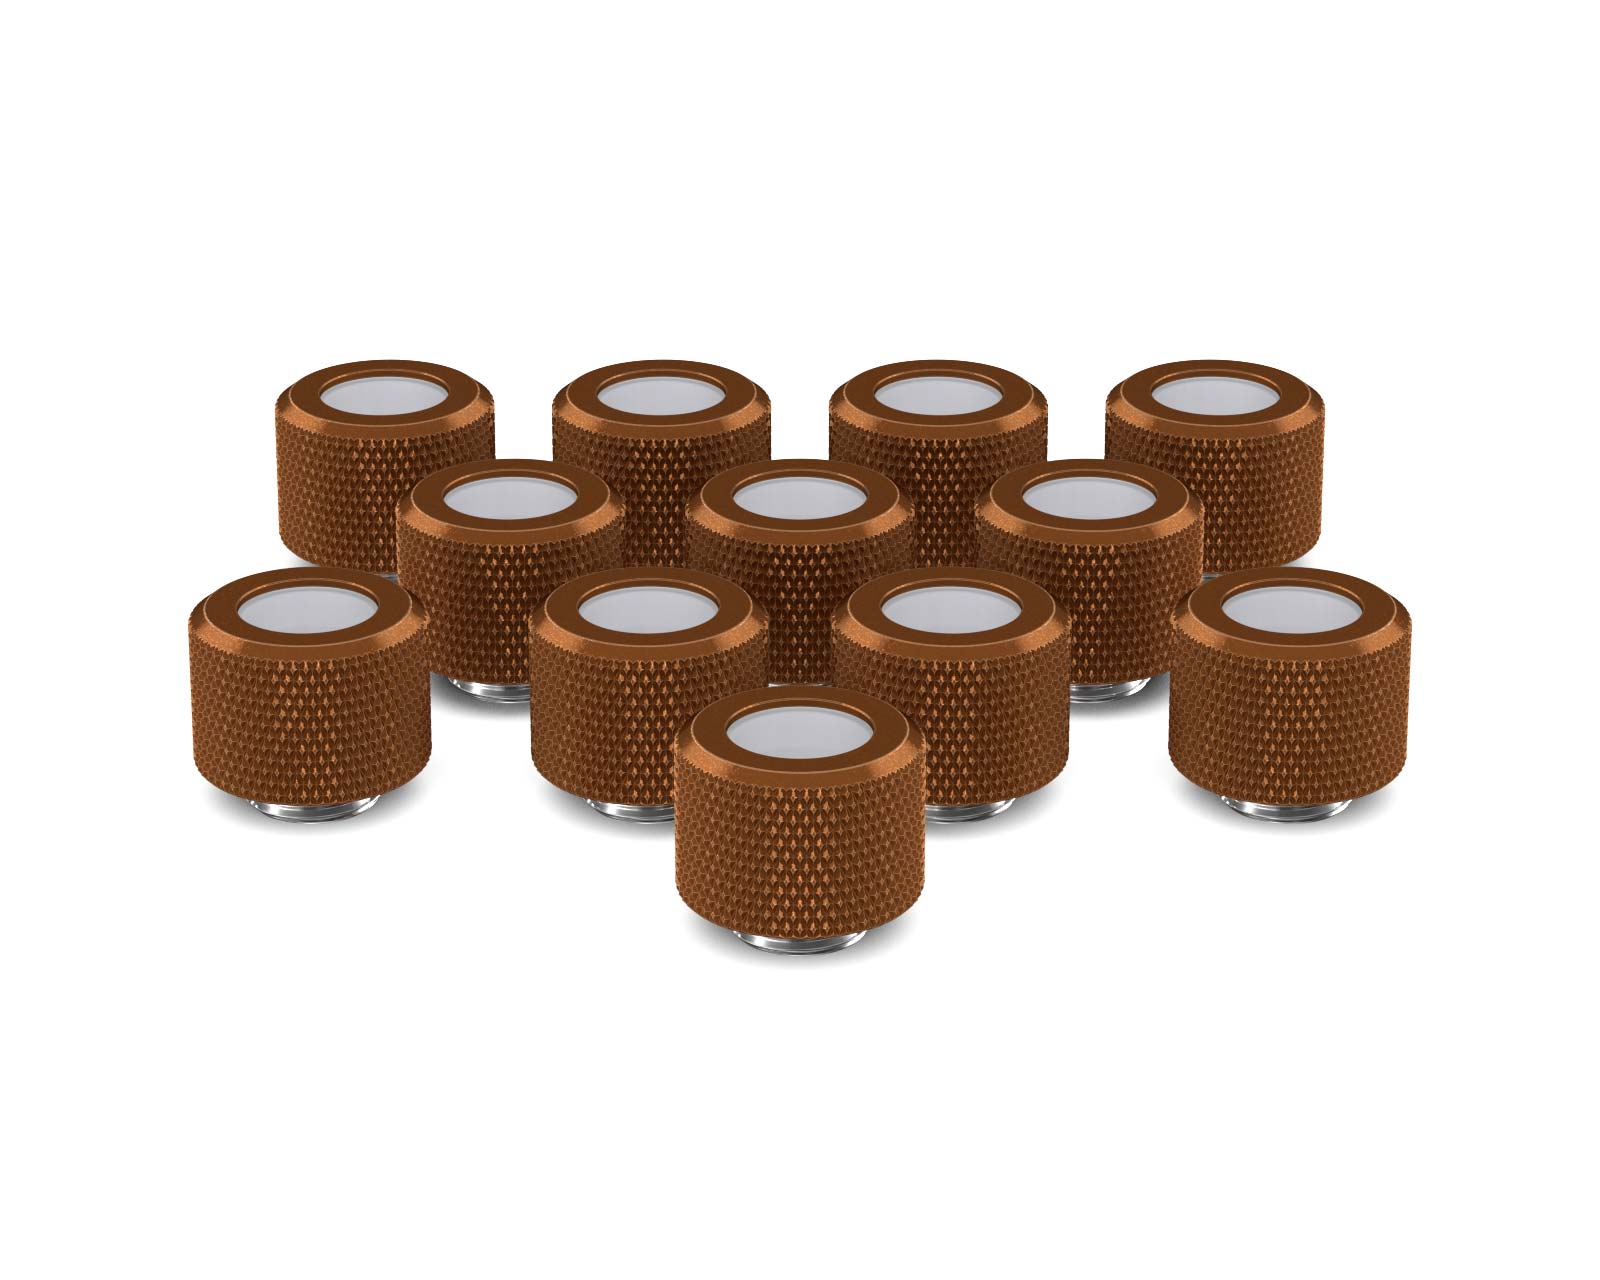 PrimoChill 12mm OD Rigid SX Fitting - 12 Pack - PrimoChill - KEEPING IT COOL Copper